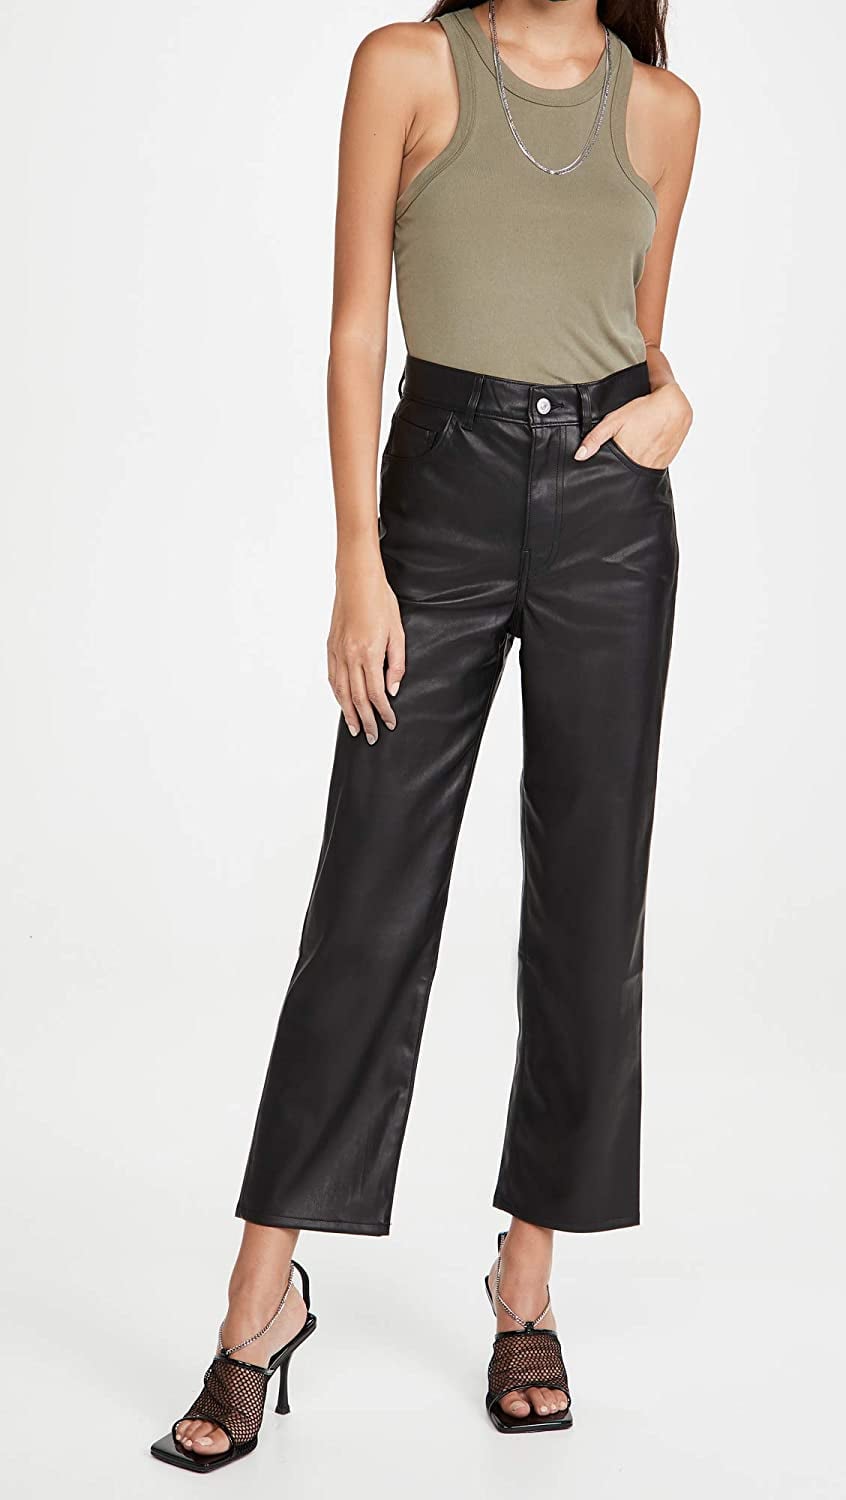 Levi's Faux Leather Rib Cage Straight Pants | Amazon Has a Huge Selection  of Comfy Pants, and These Are the 17 Pairs We Love | POPSUGAR Fashion Photo  7